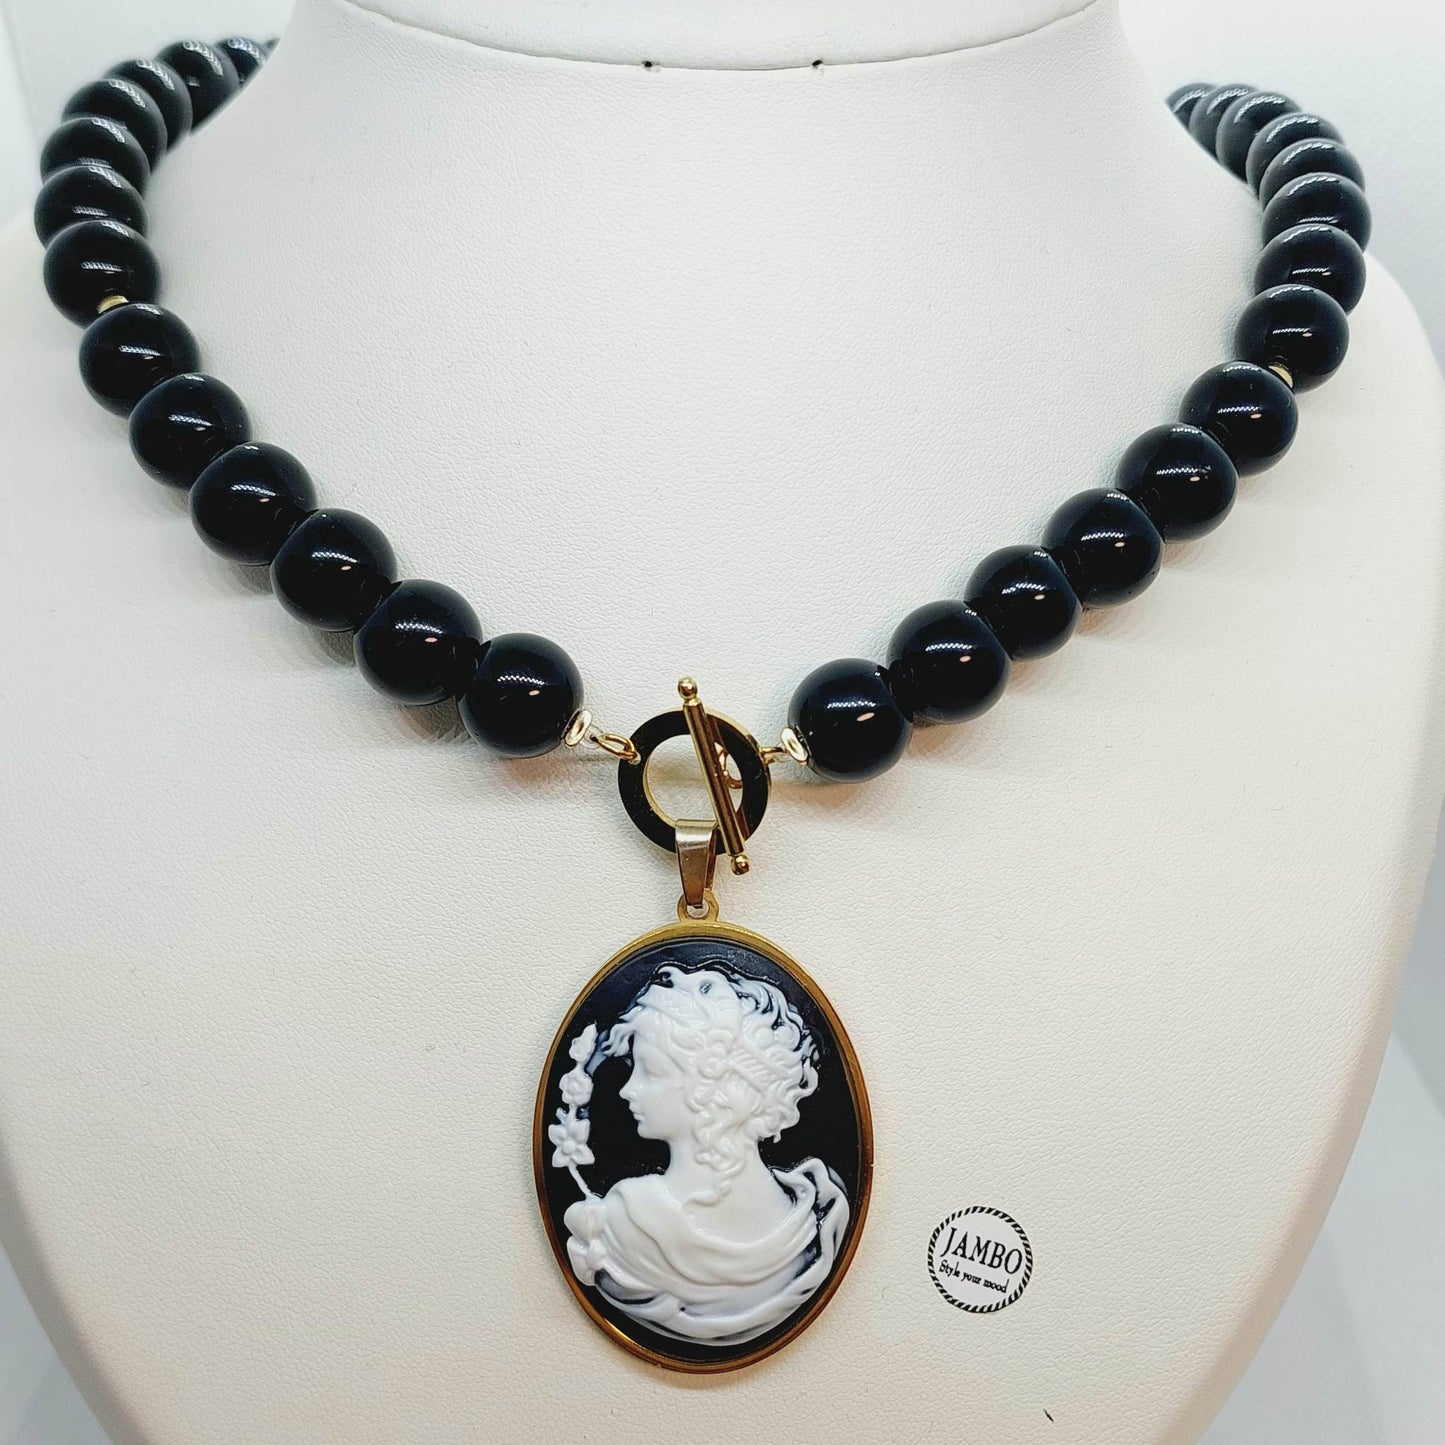 Natural Black Onyx Necklace and Cameo Pendant with 12mm Stones